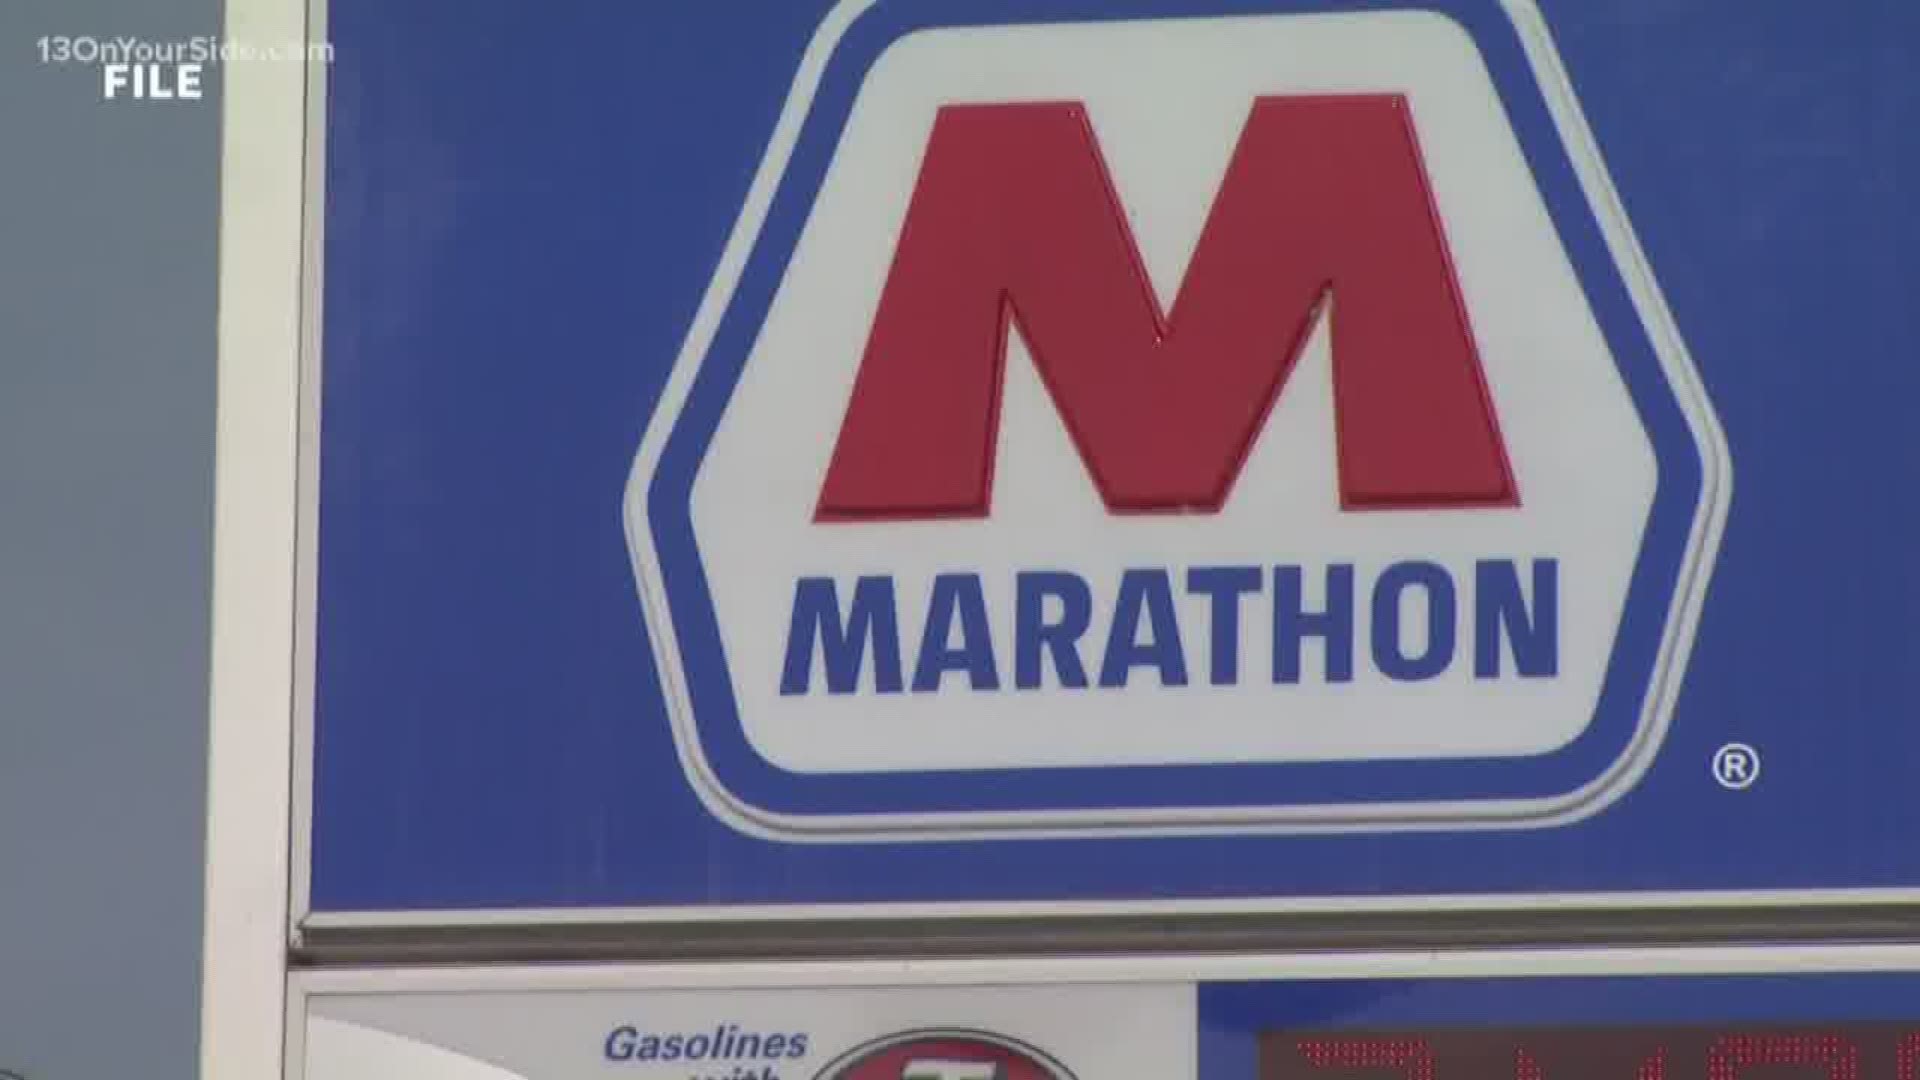 Gas prices all over the nation are down, which isn't something we typically see heading into the prime of summer driving season, gas analyst say.